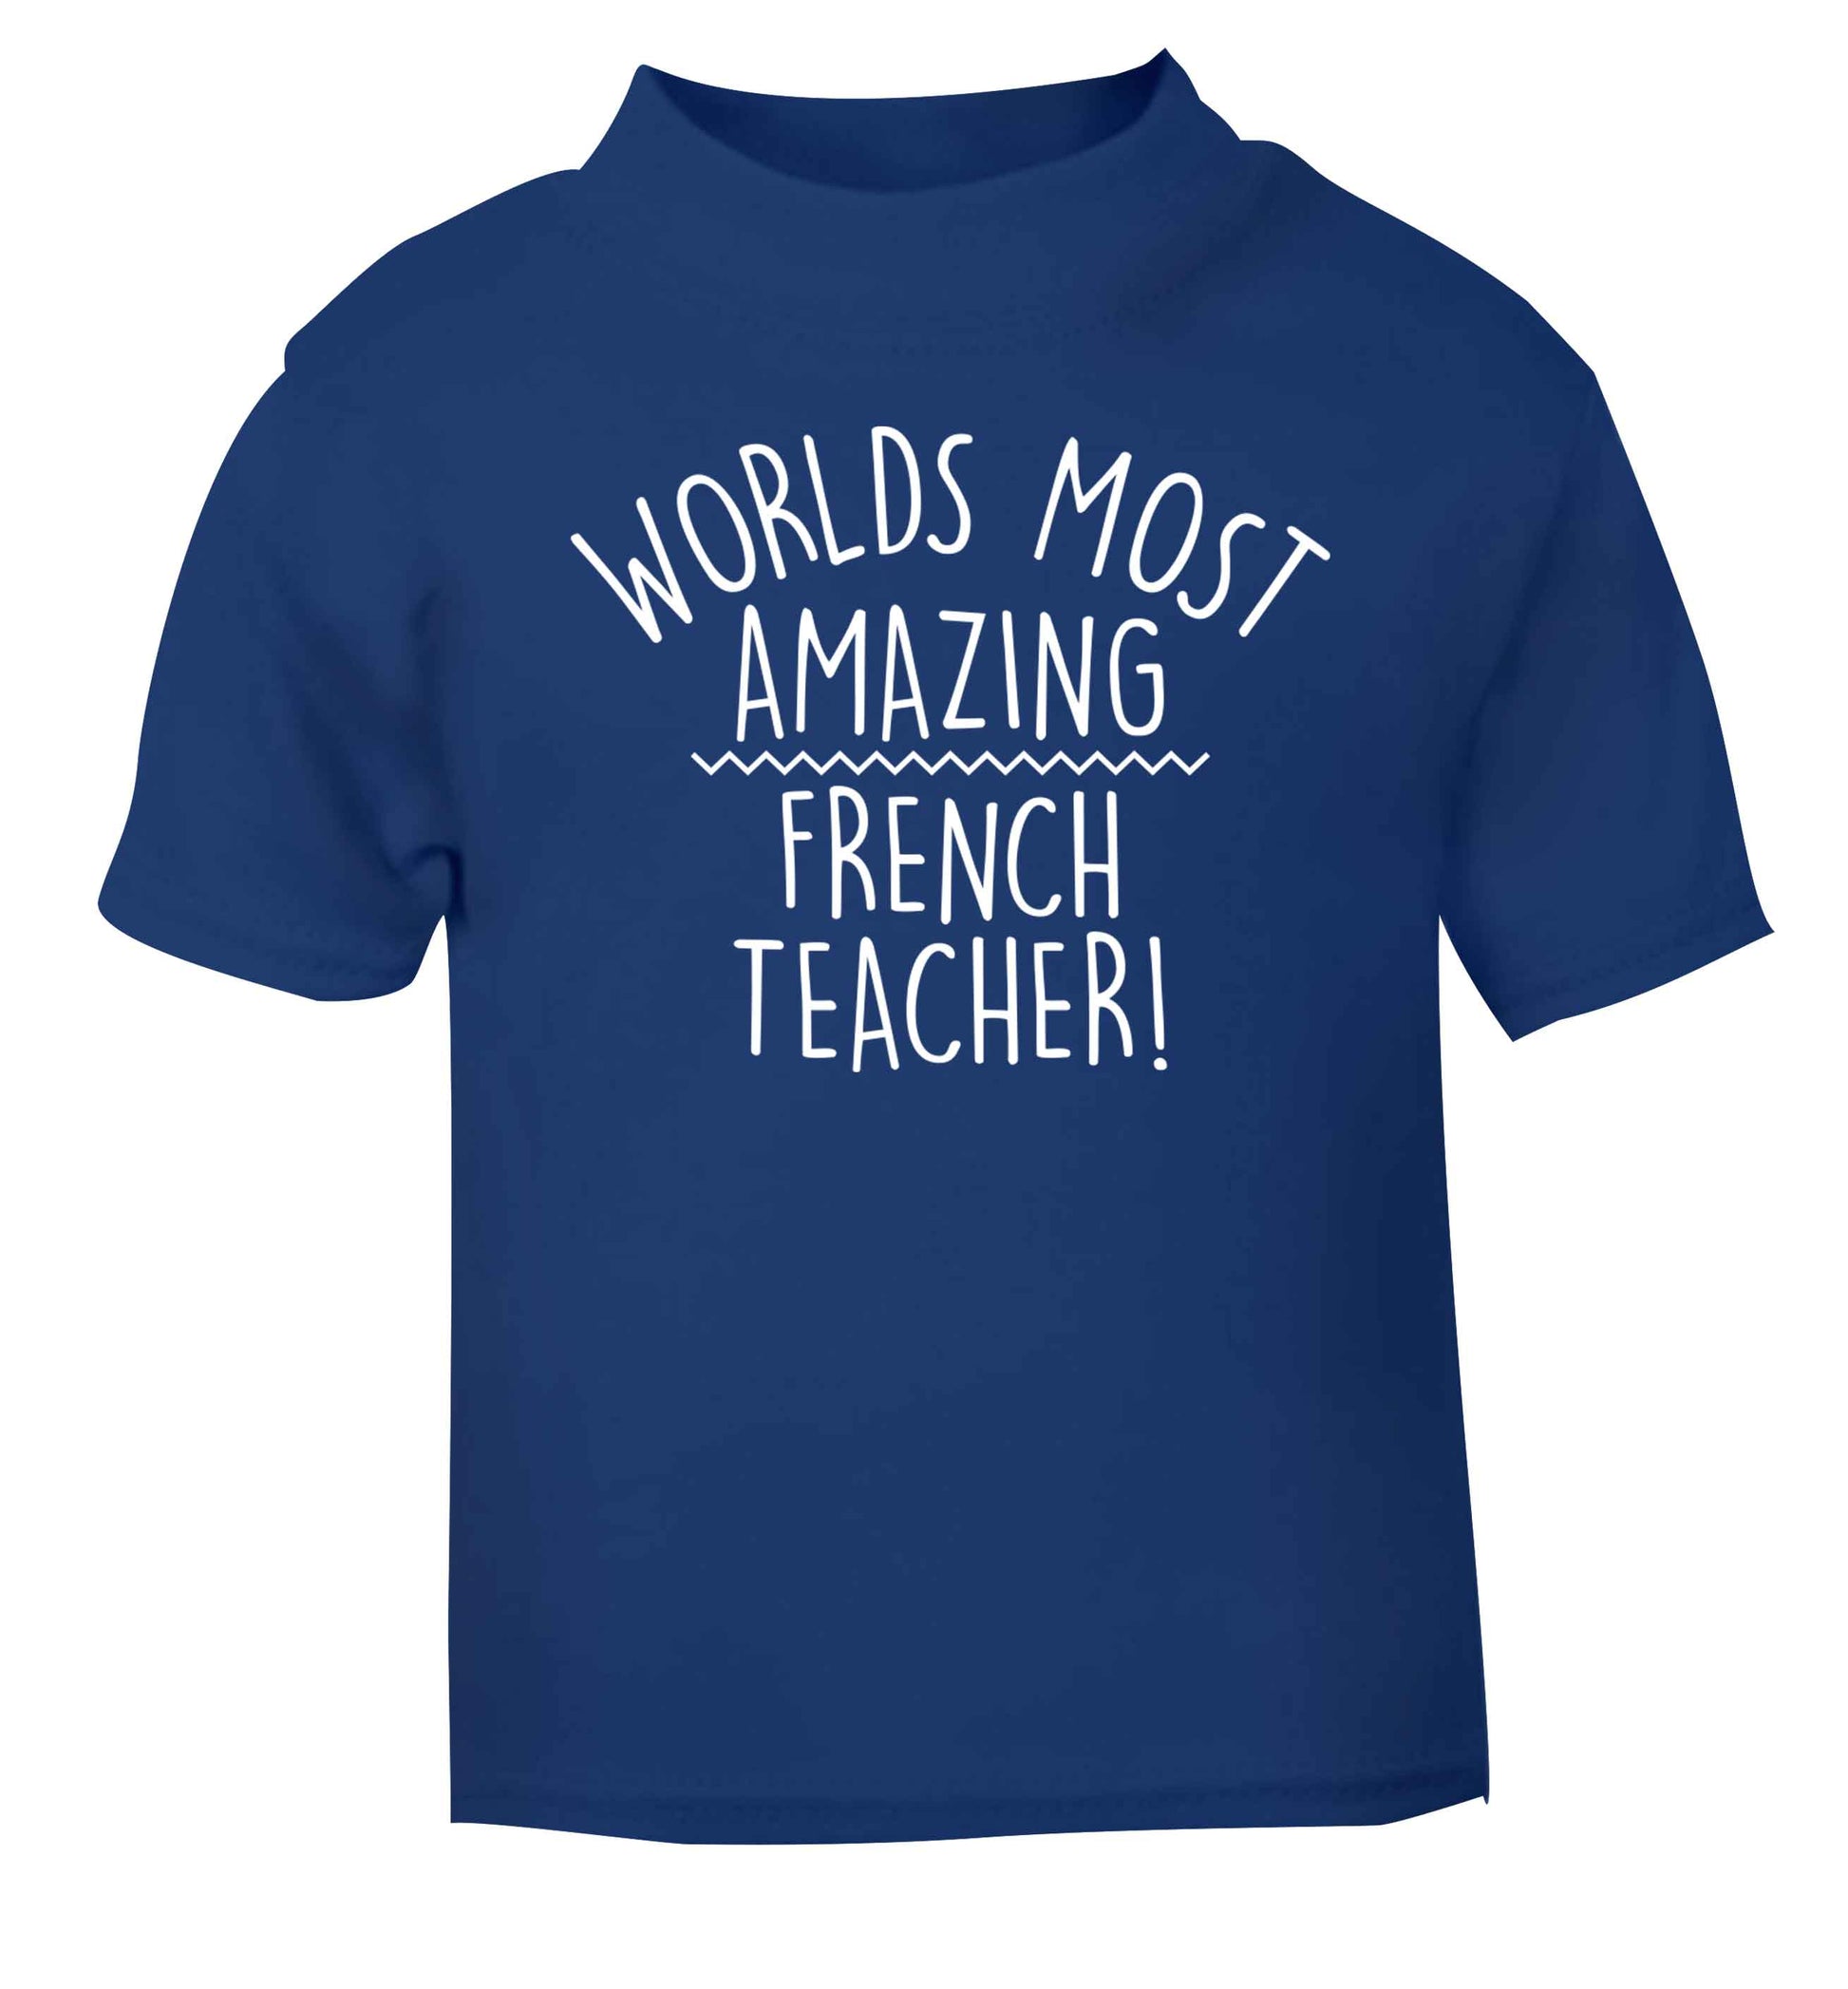 Worlds most amazing French teacher blue baby toddler Tshirt 2 Years